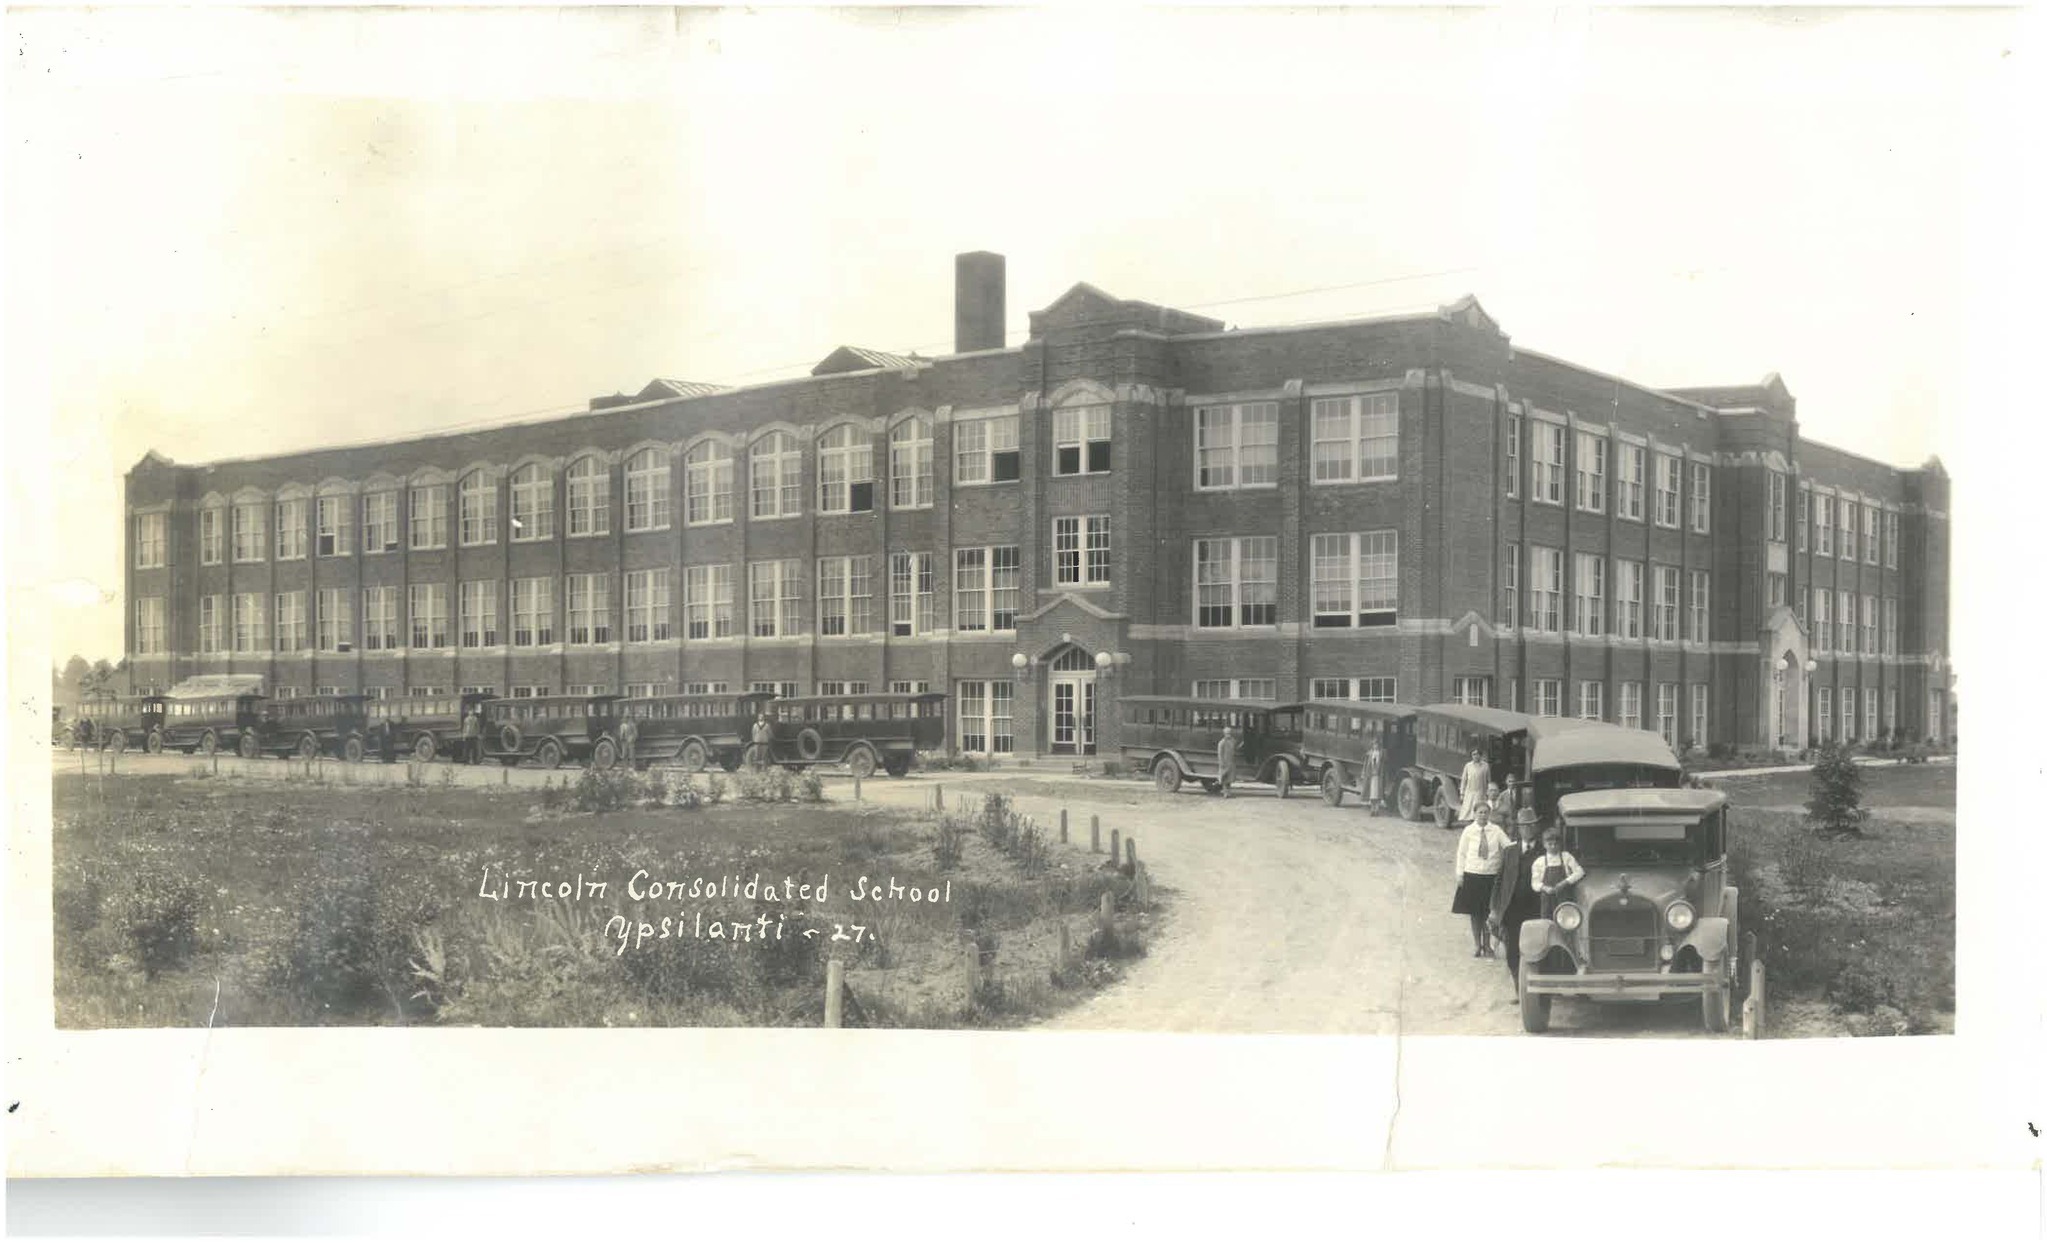 1927 School with Busses